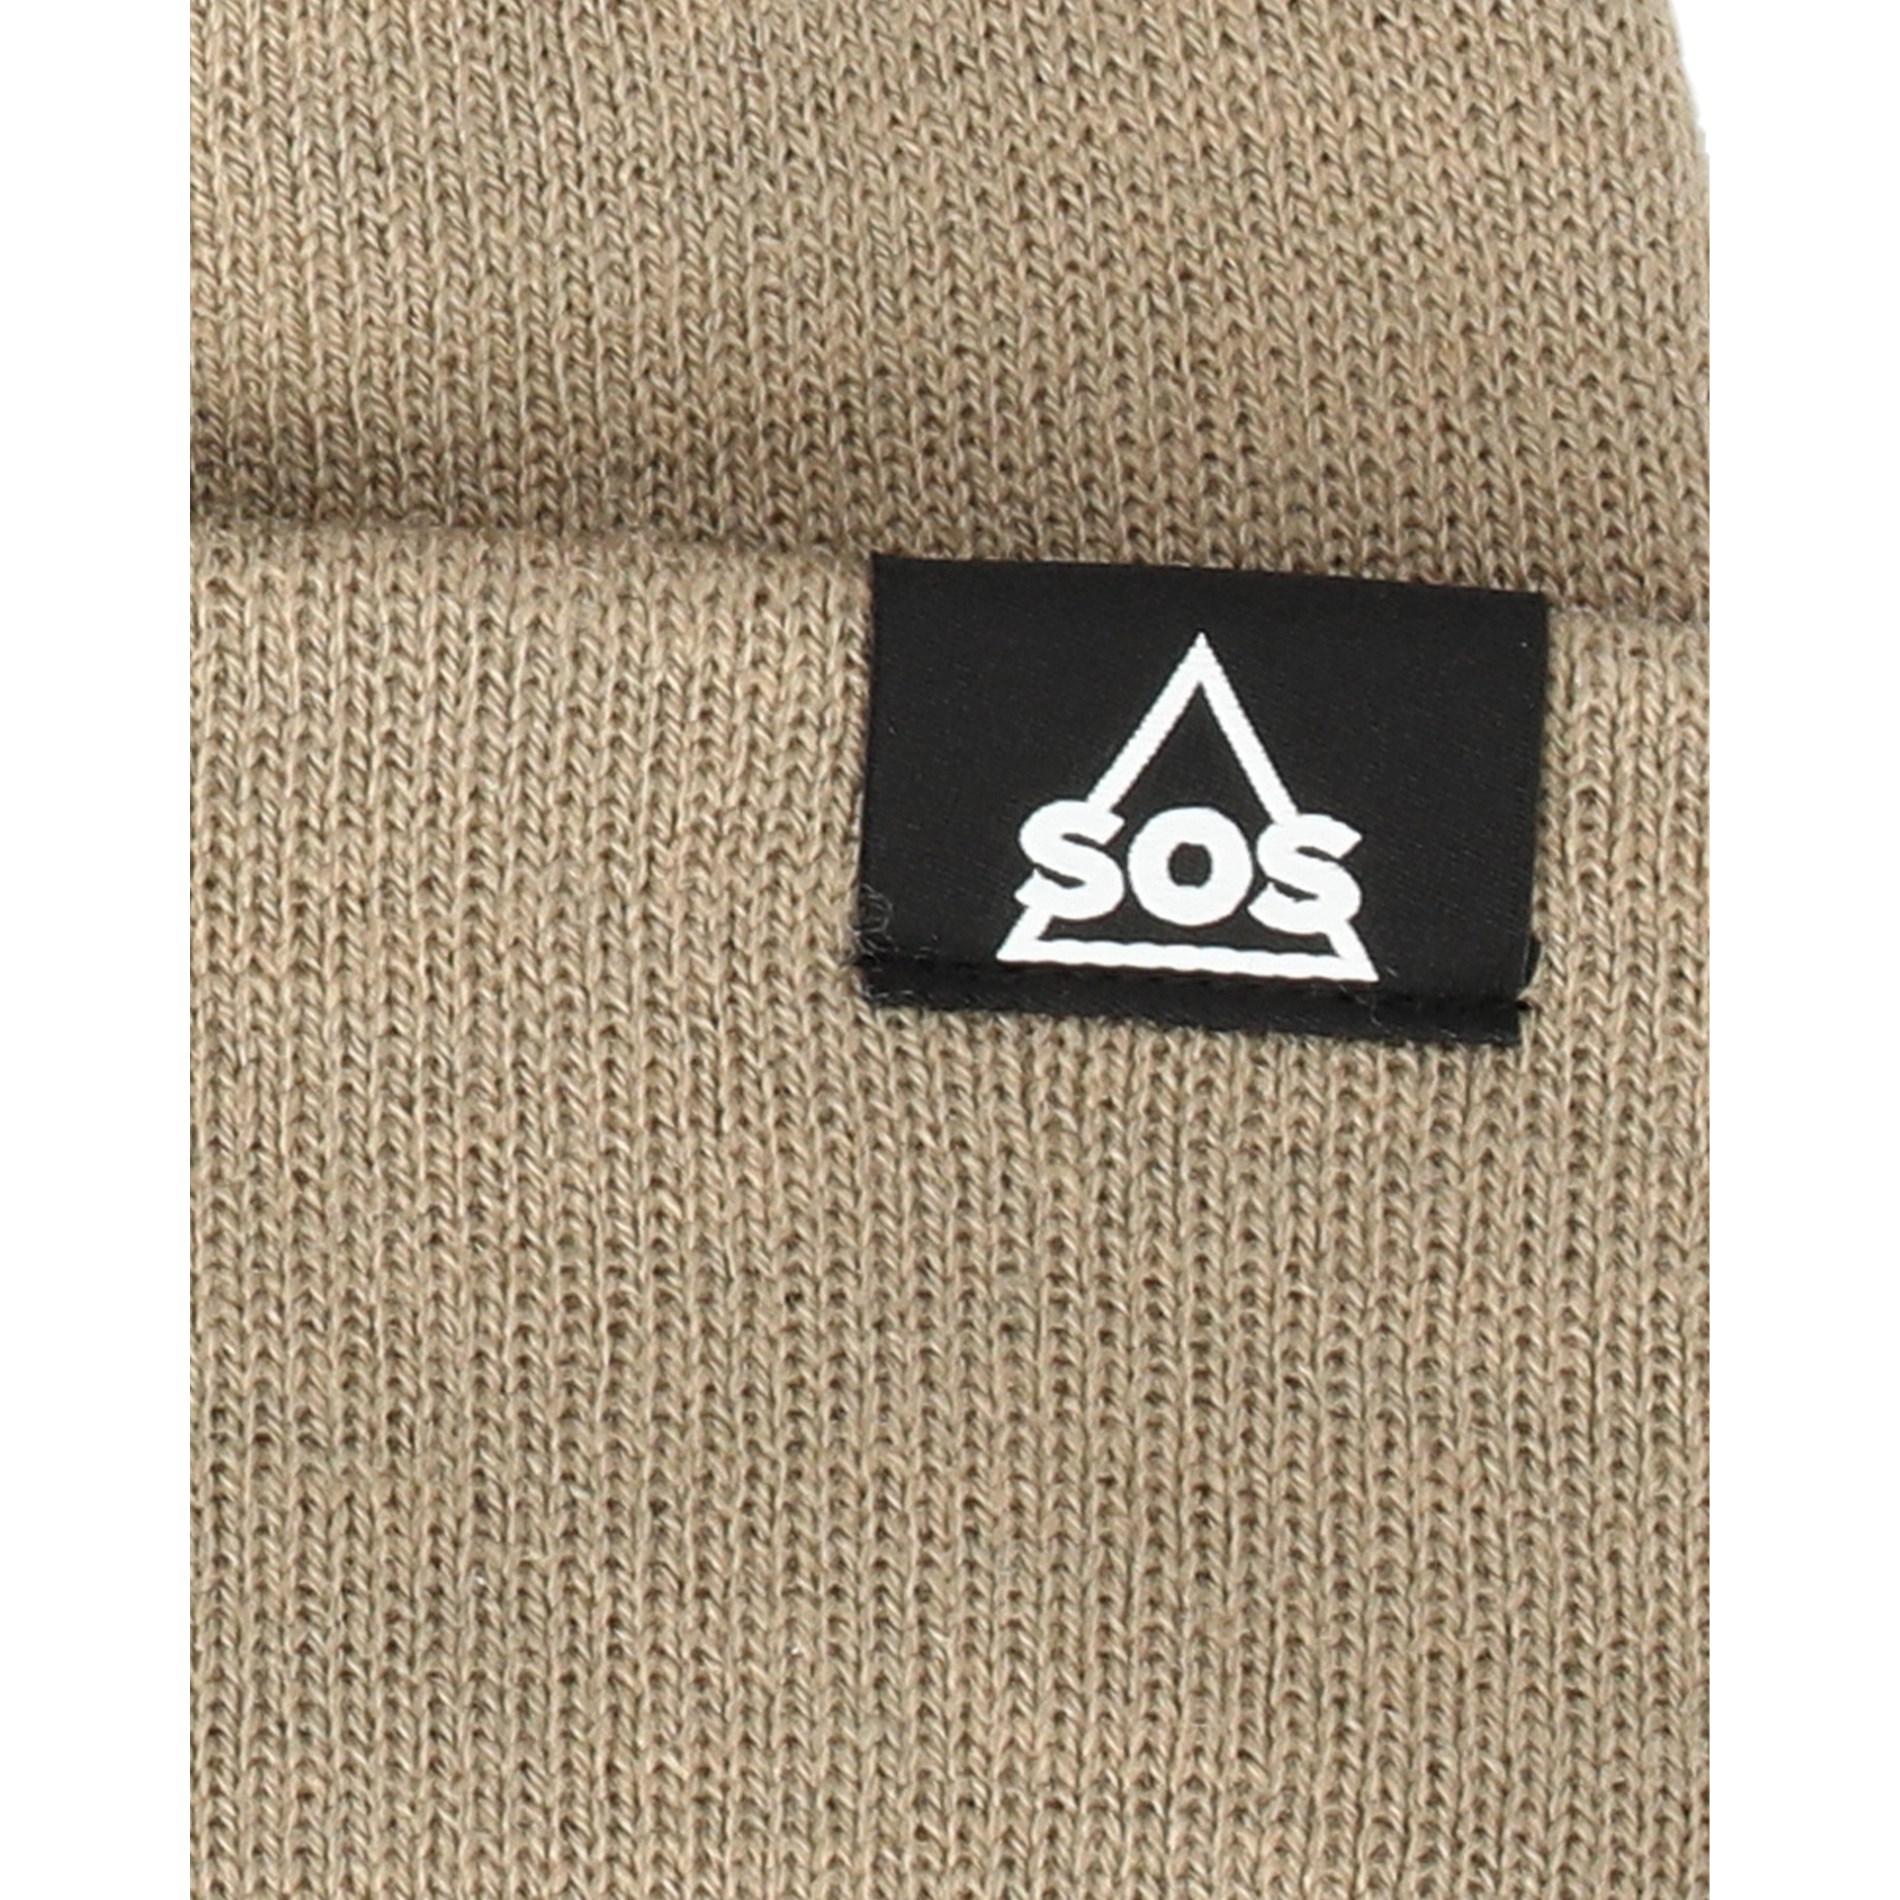 SOS Beanie Golte Wolf Timber